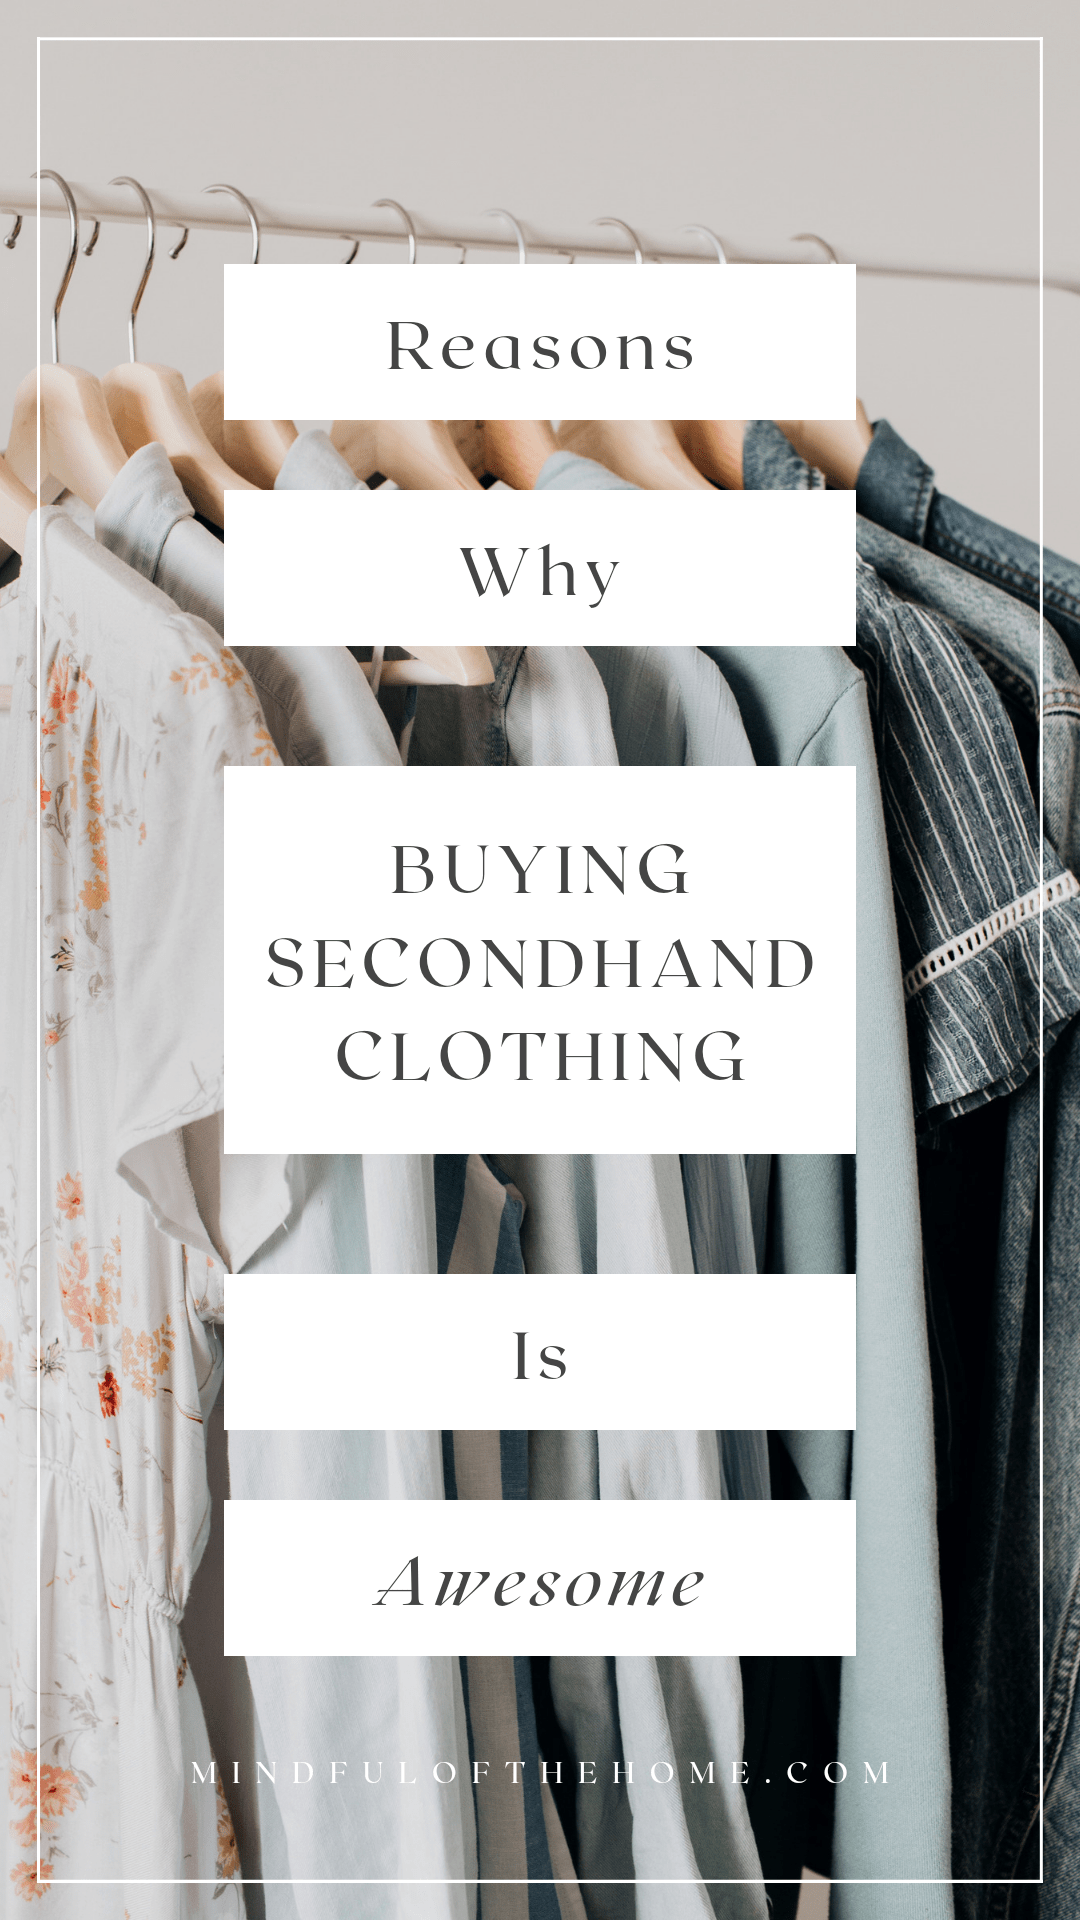 9 Reasons Why Buying Secondhand Clothes is AWESOME - Mindful of